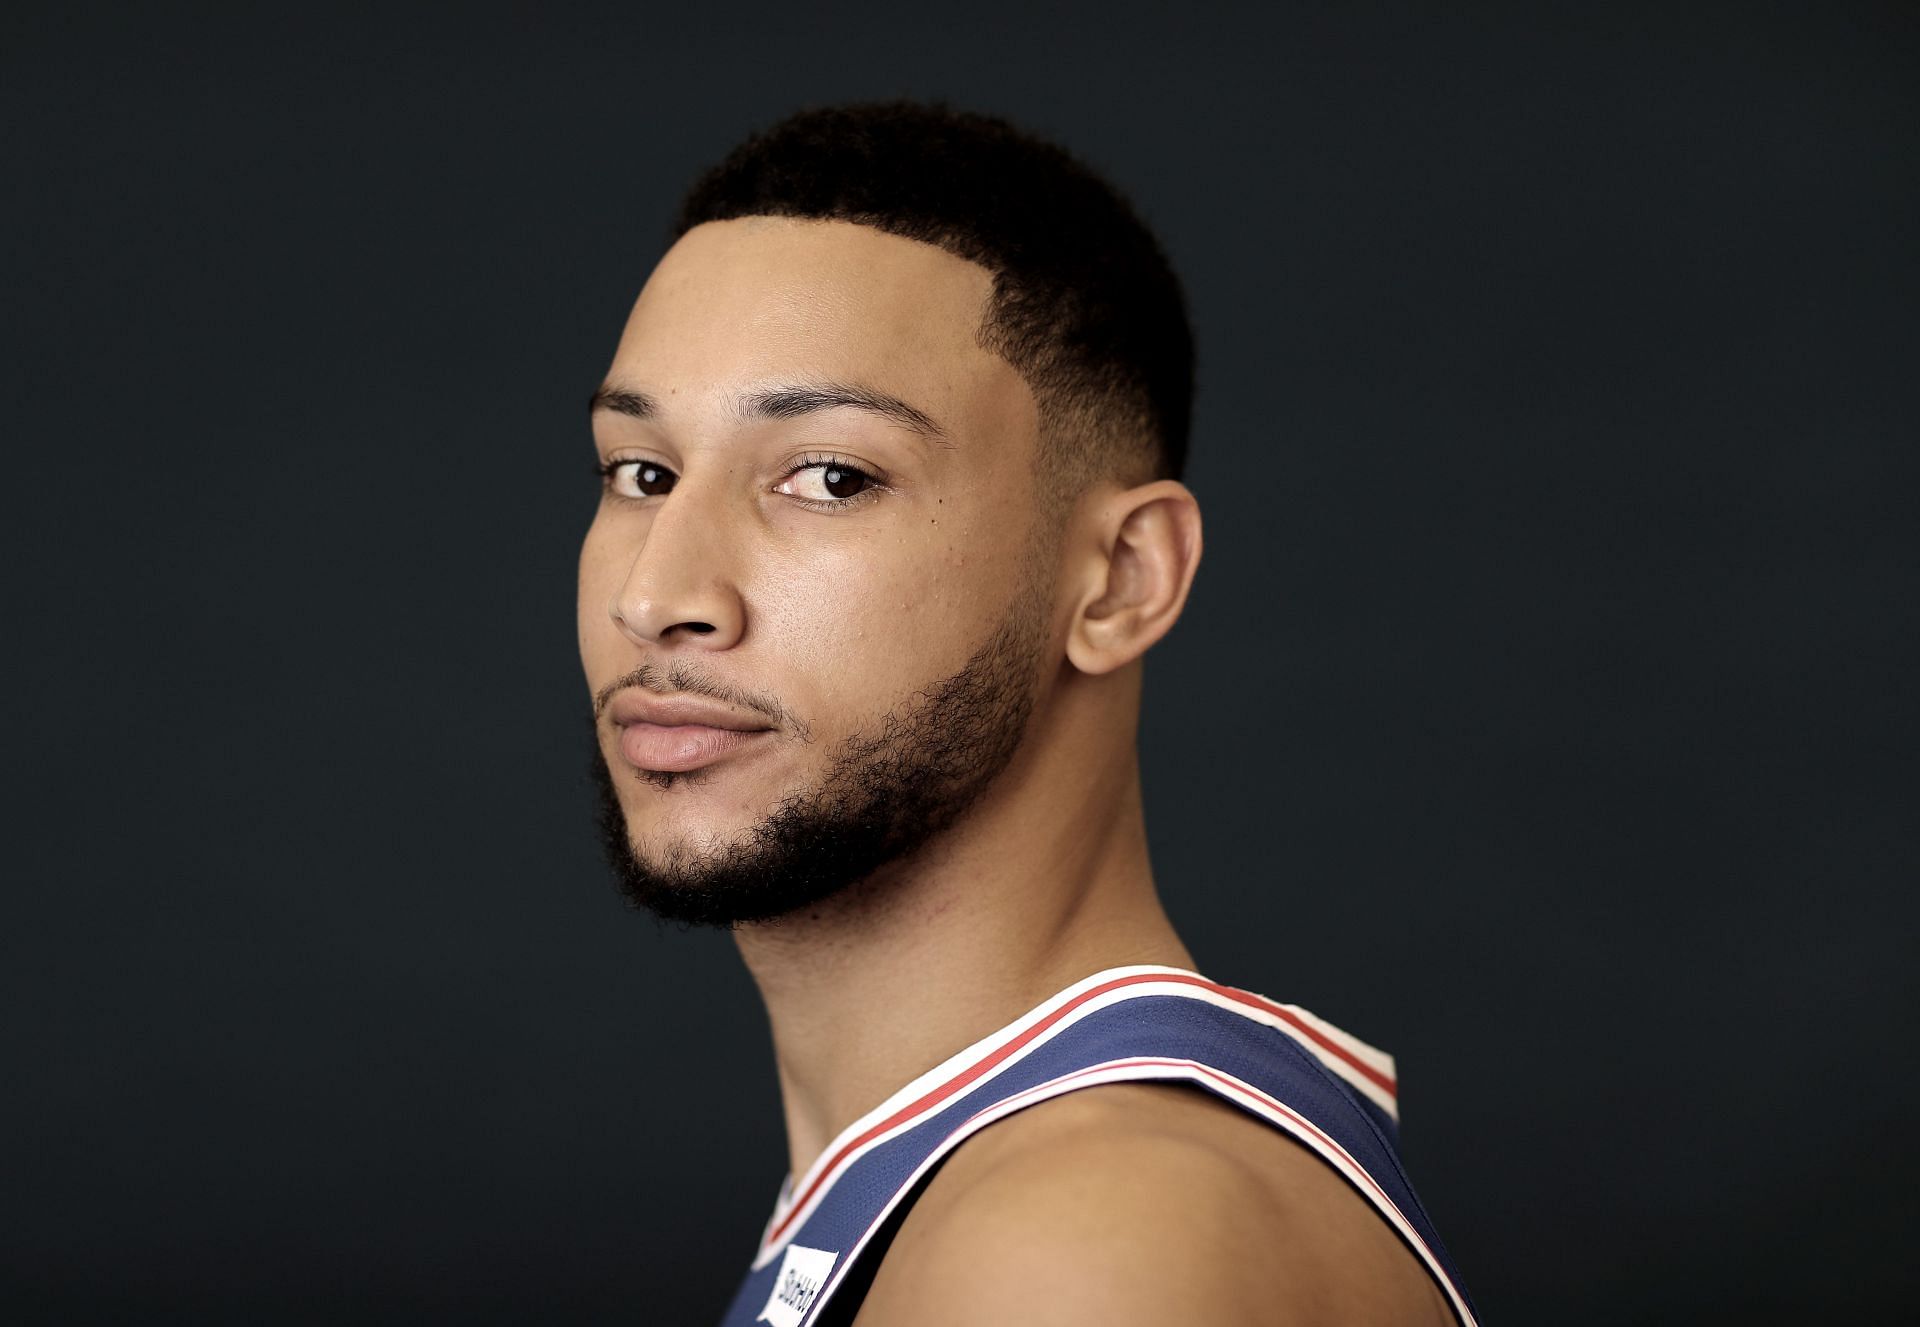 Former Philadelphia 76ers star Ben Simmons is ready for his new journey with the Brooklyn Nets.